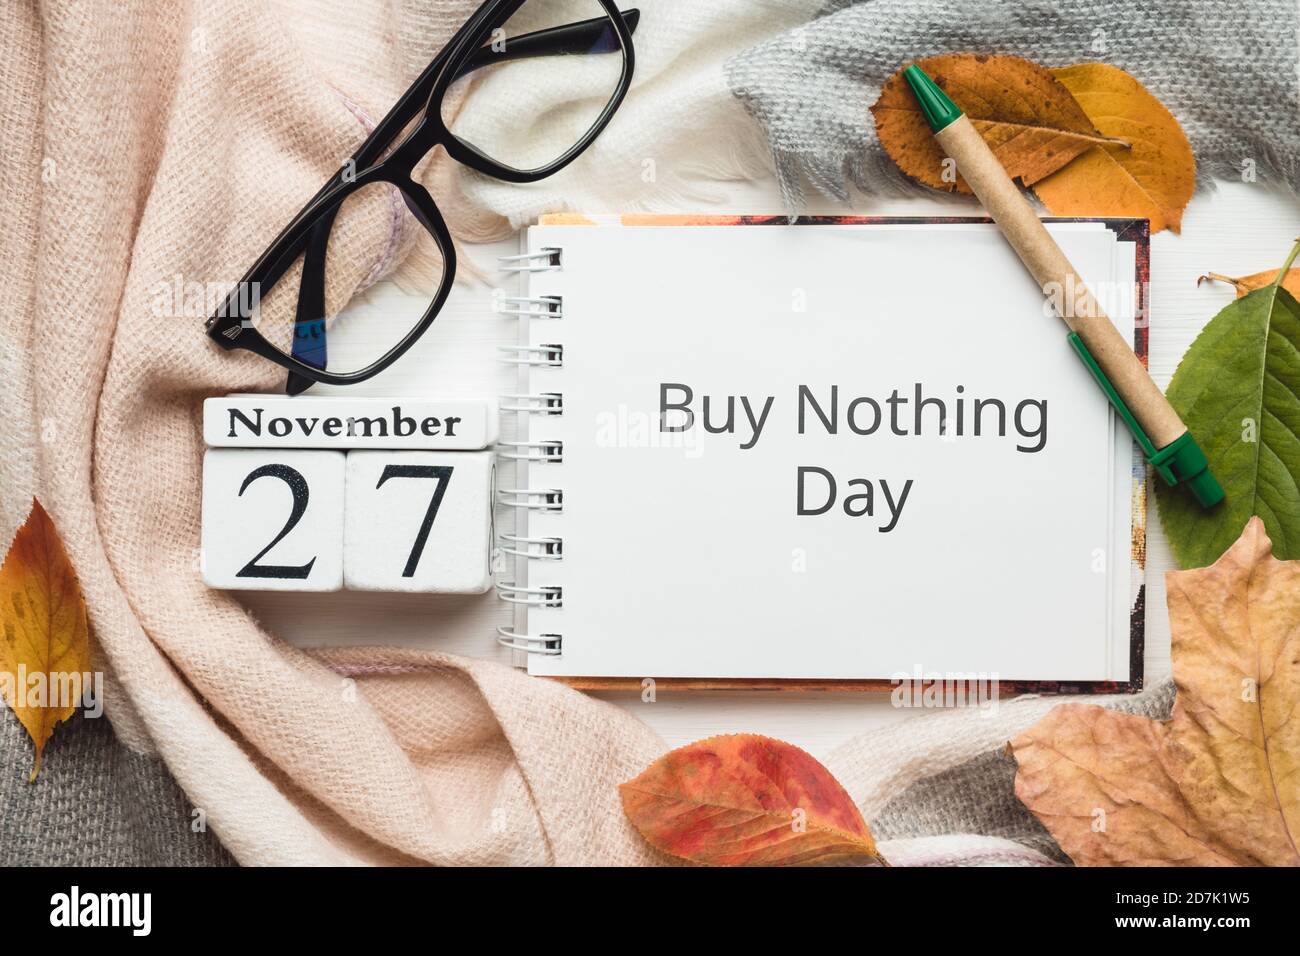 Buy Nothing Day of autumn month calendar November. Stock Photo